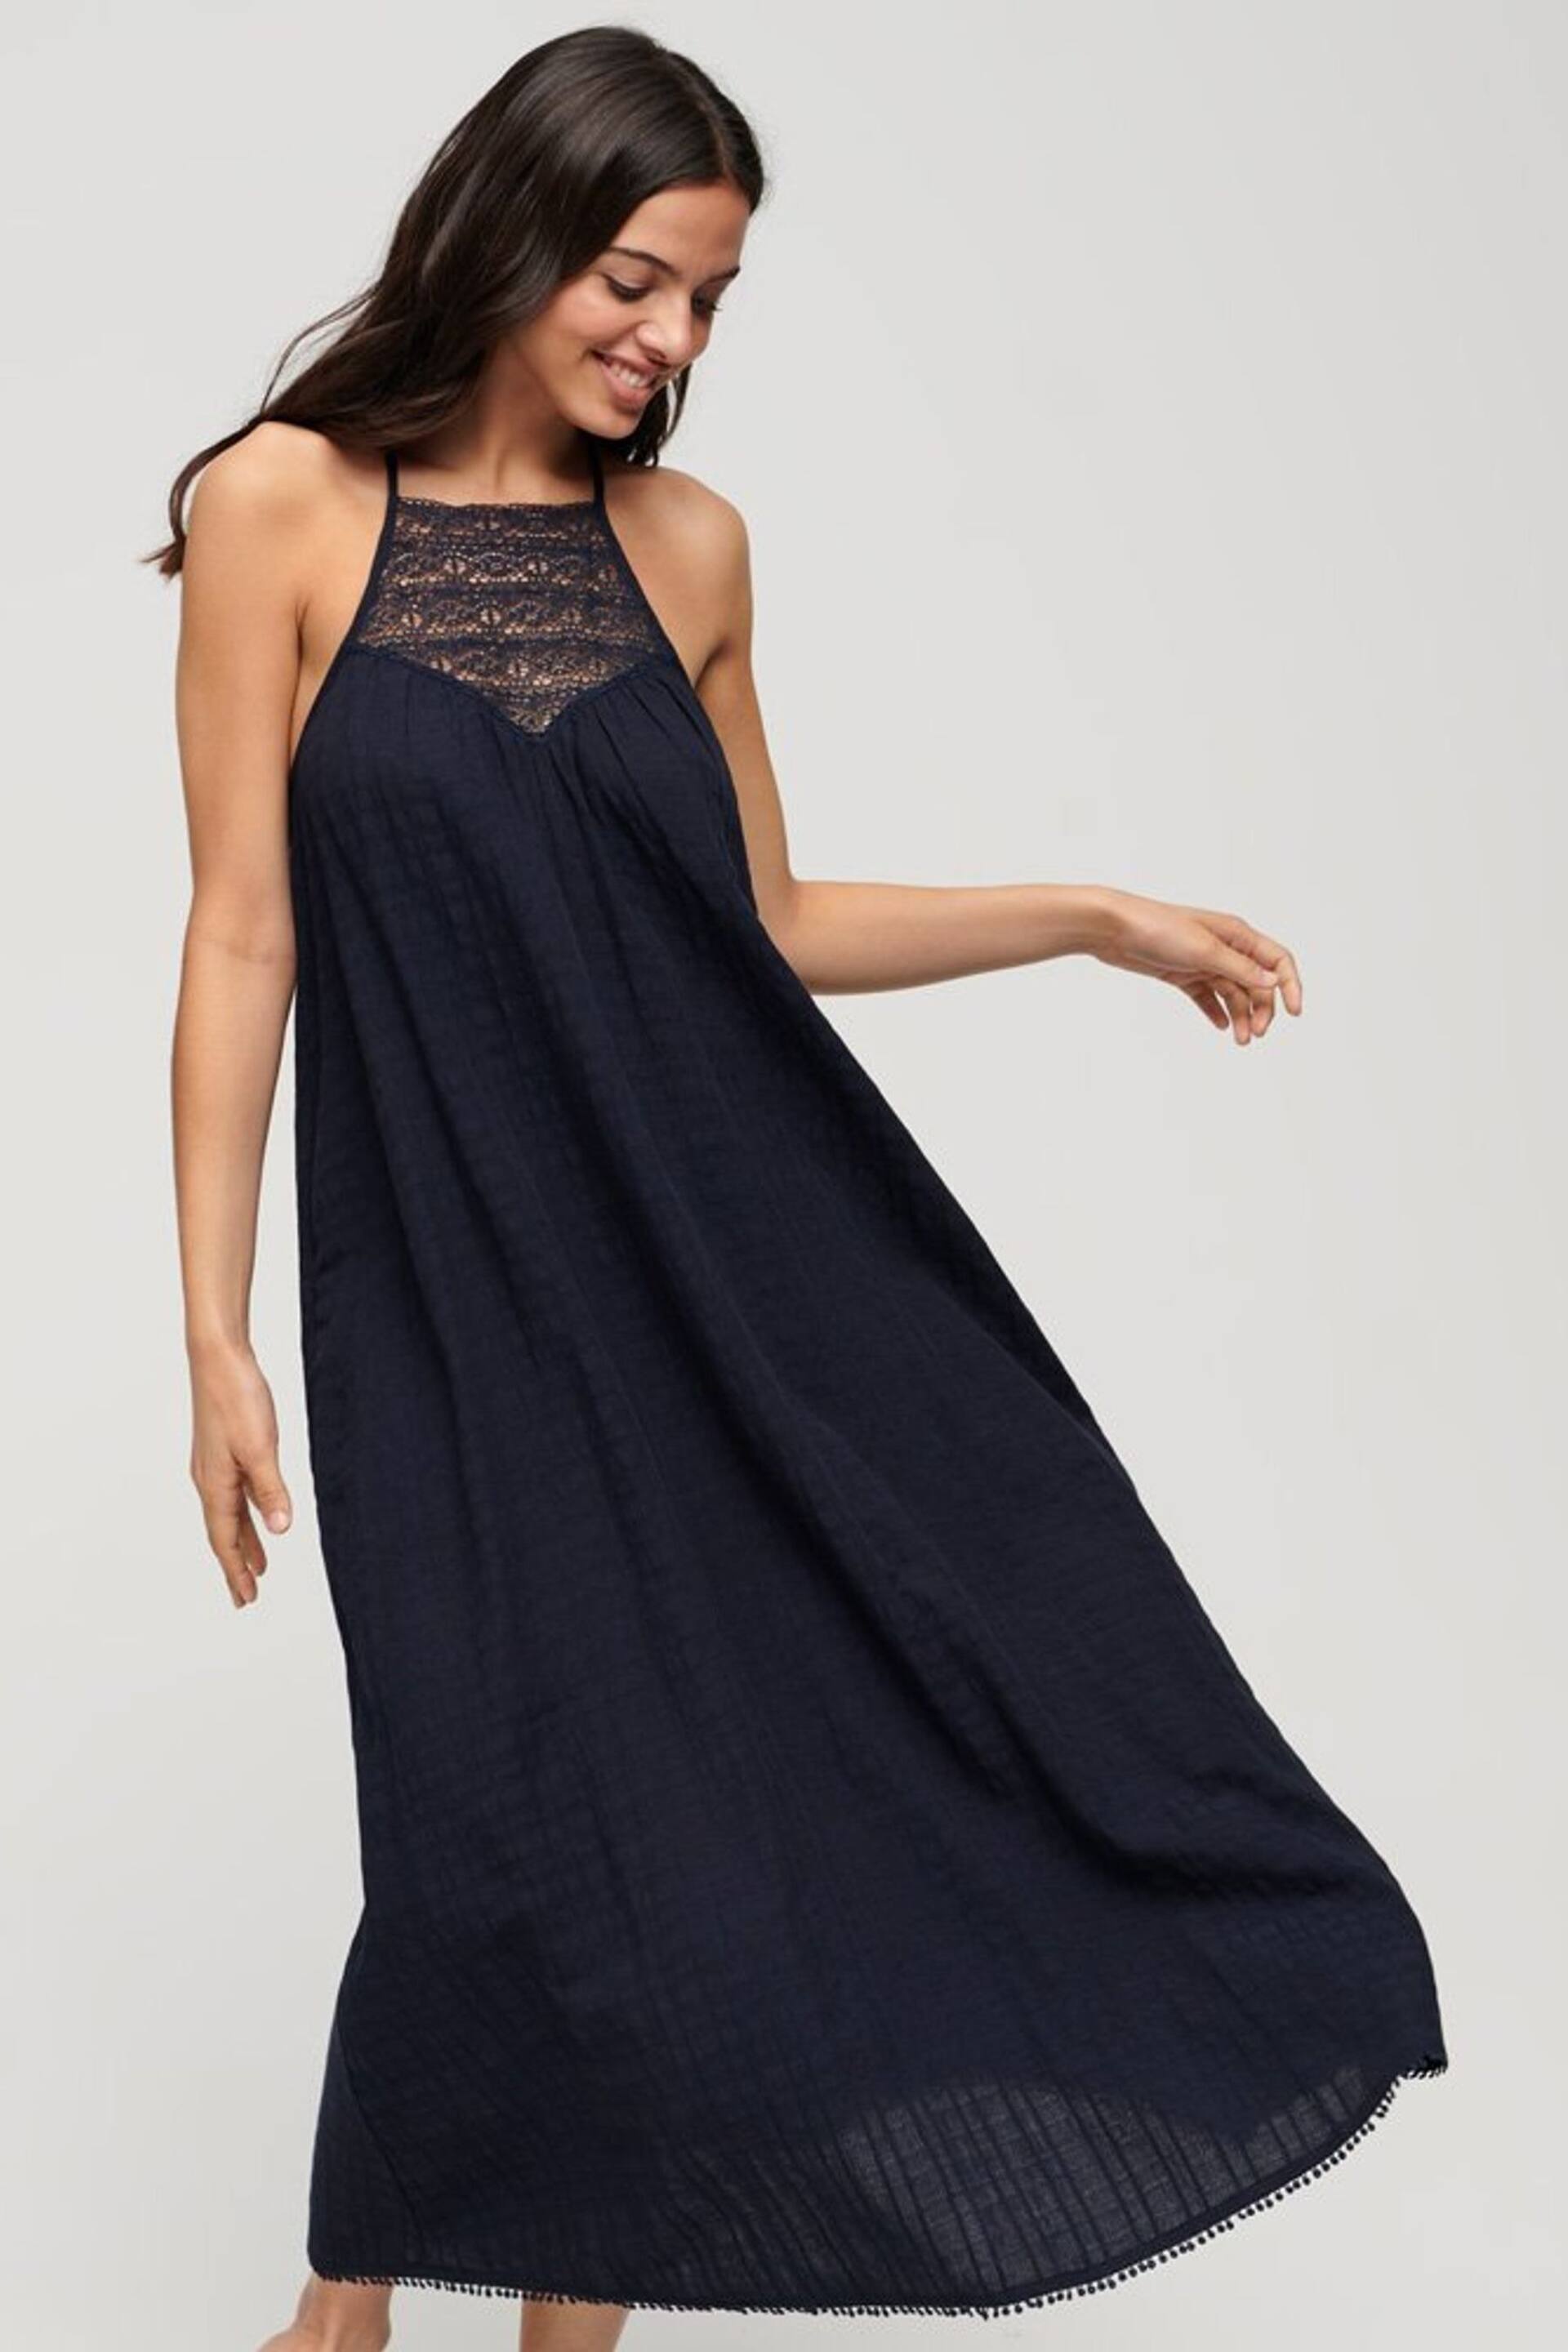 Superdry Blue Lace Halter Maxi Beach Dress - Image 3 of 5